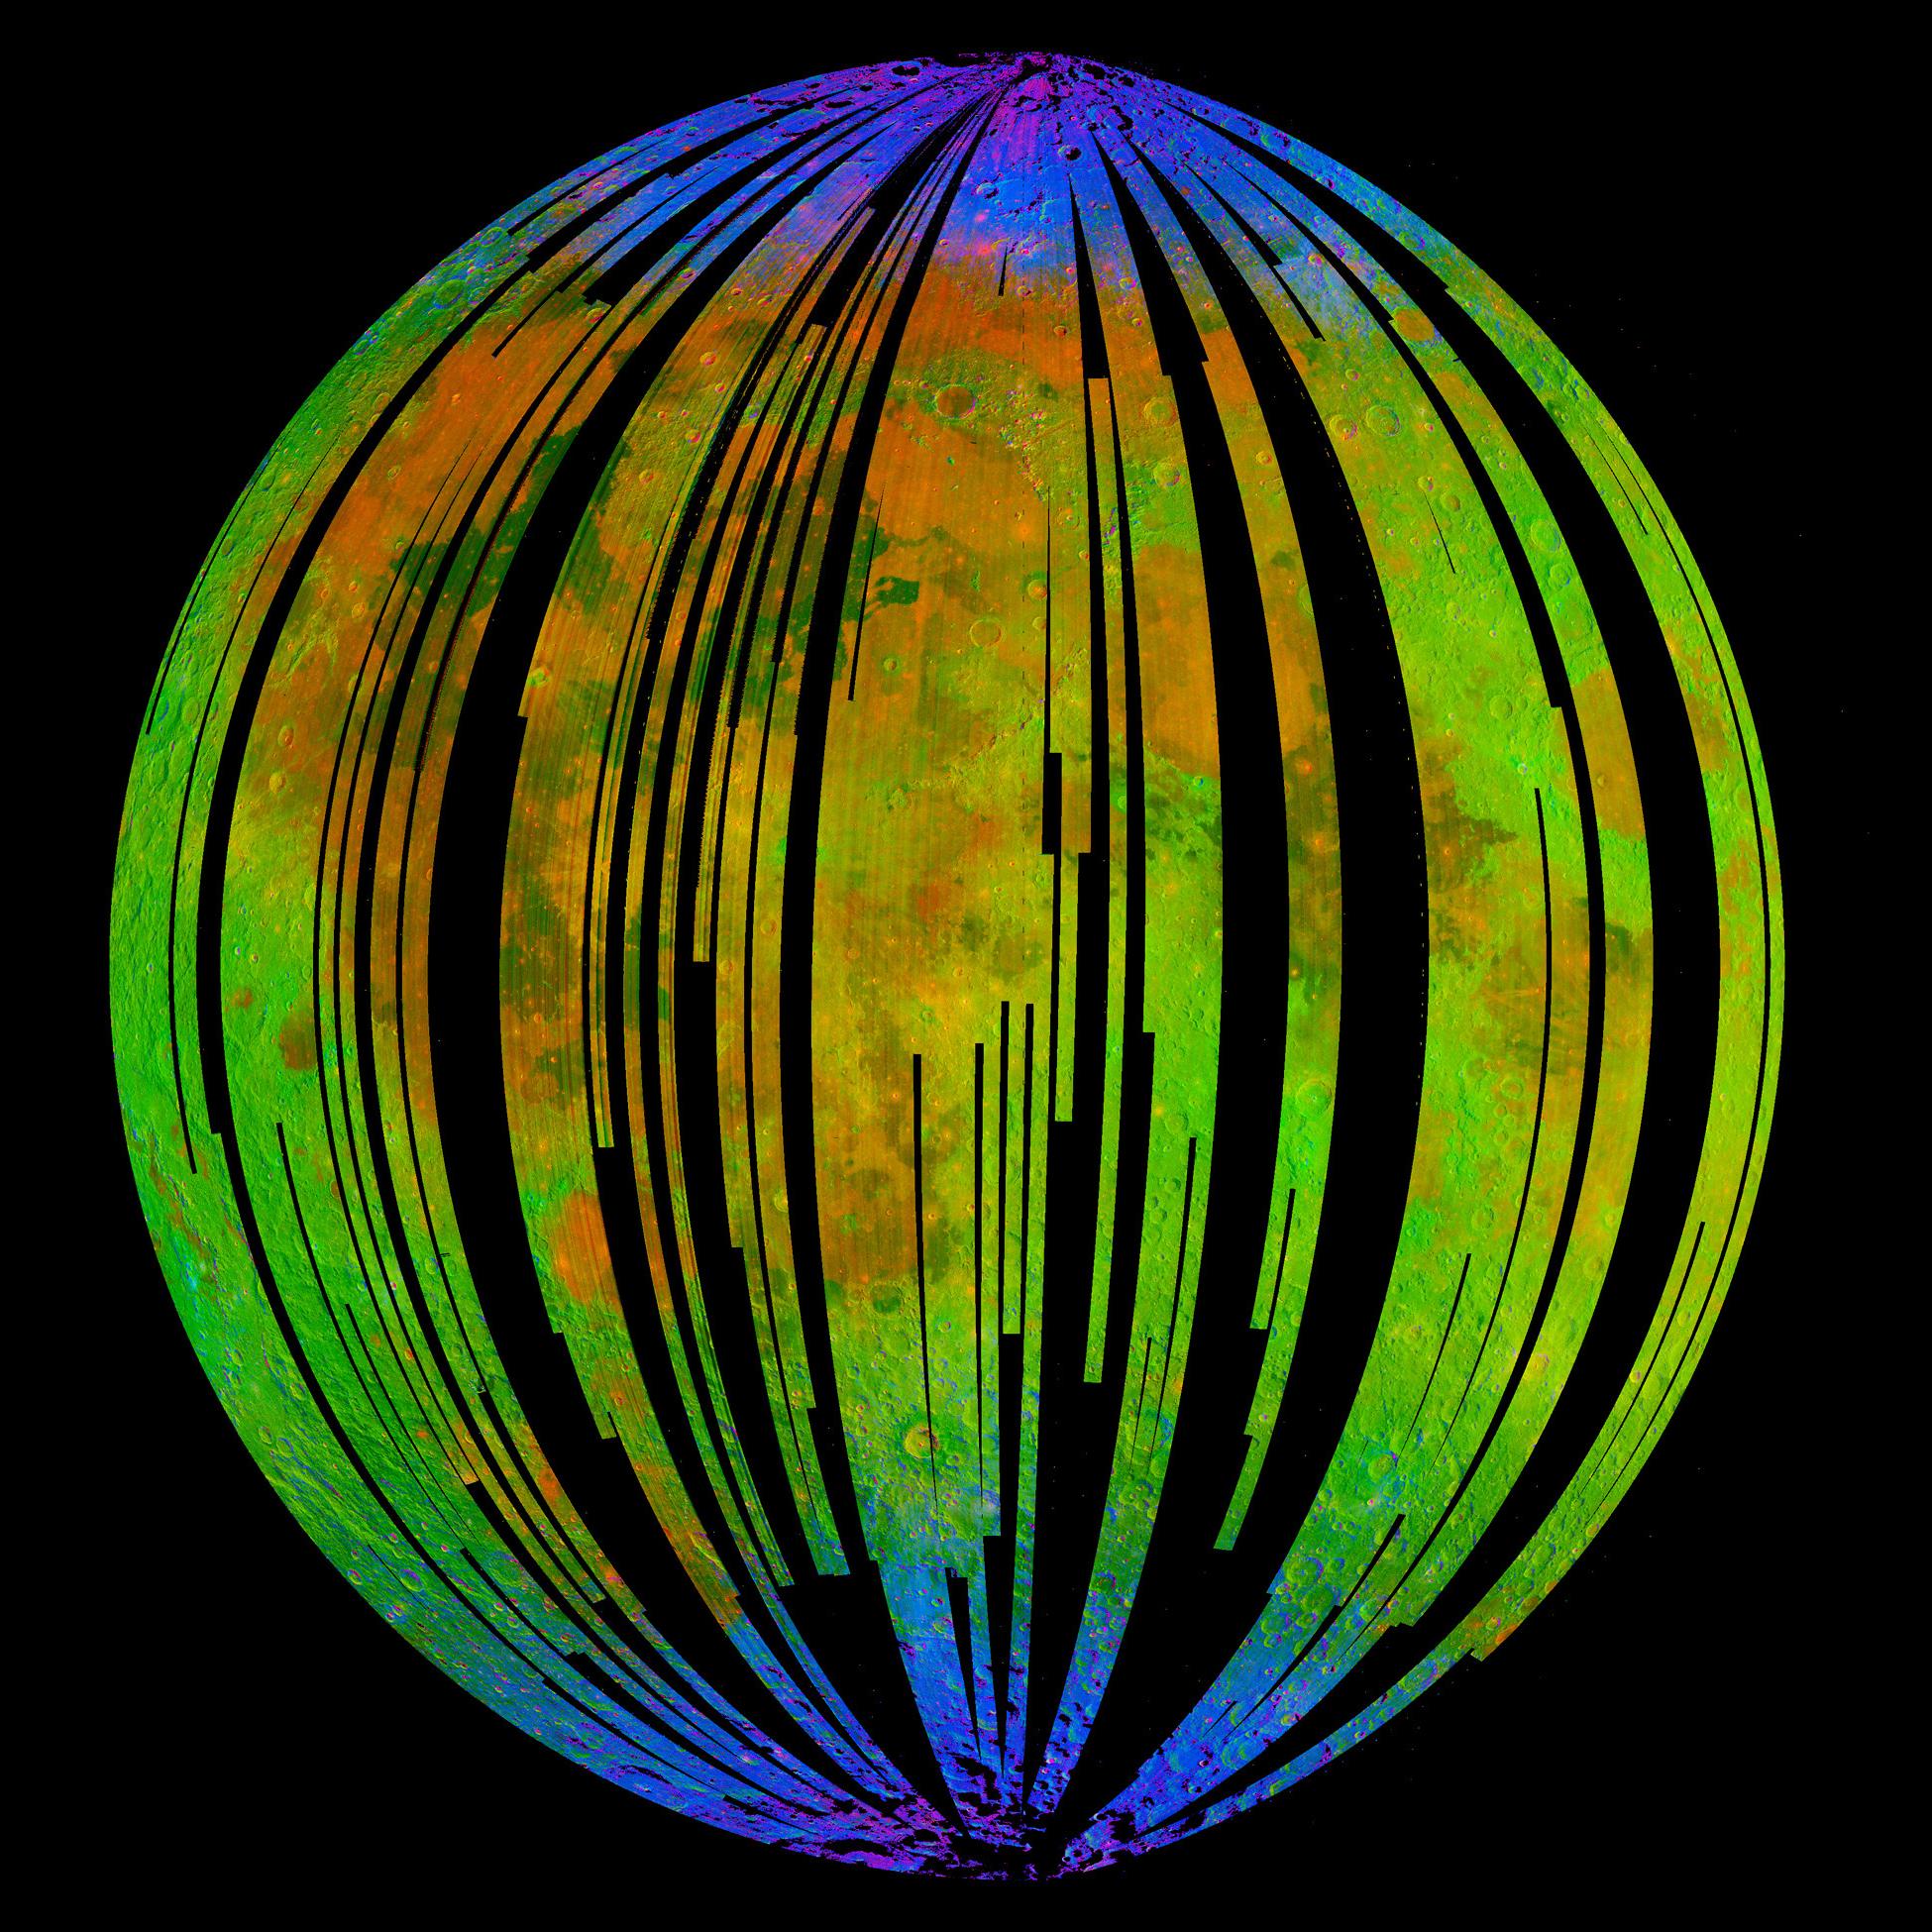 Digitalized bands of gradient colors superimposed over the Moon's surface, within a circle area.